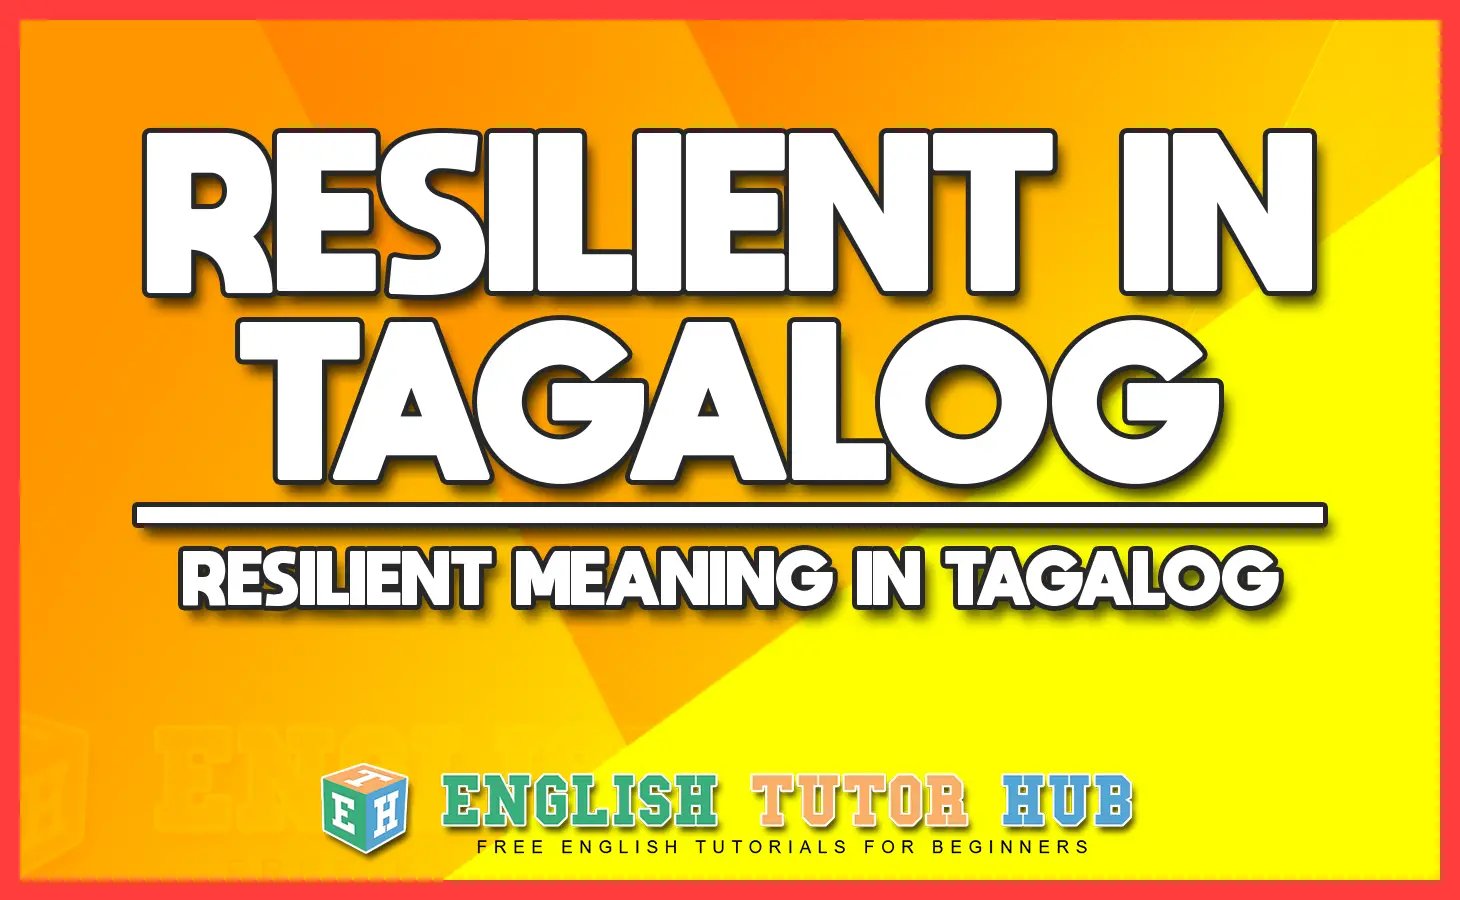 Resilient in Tagalog - Resilient Meaning in Tagalog